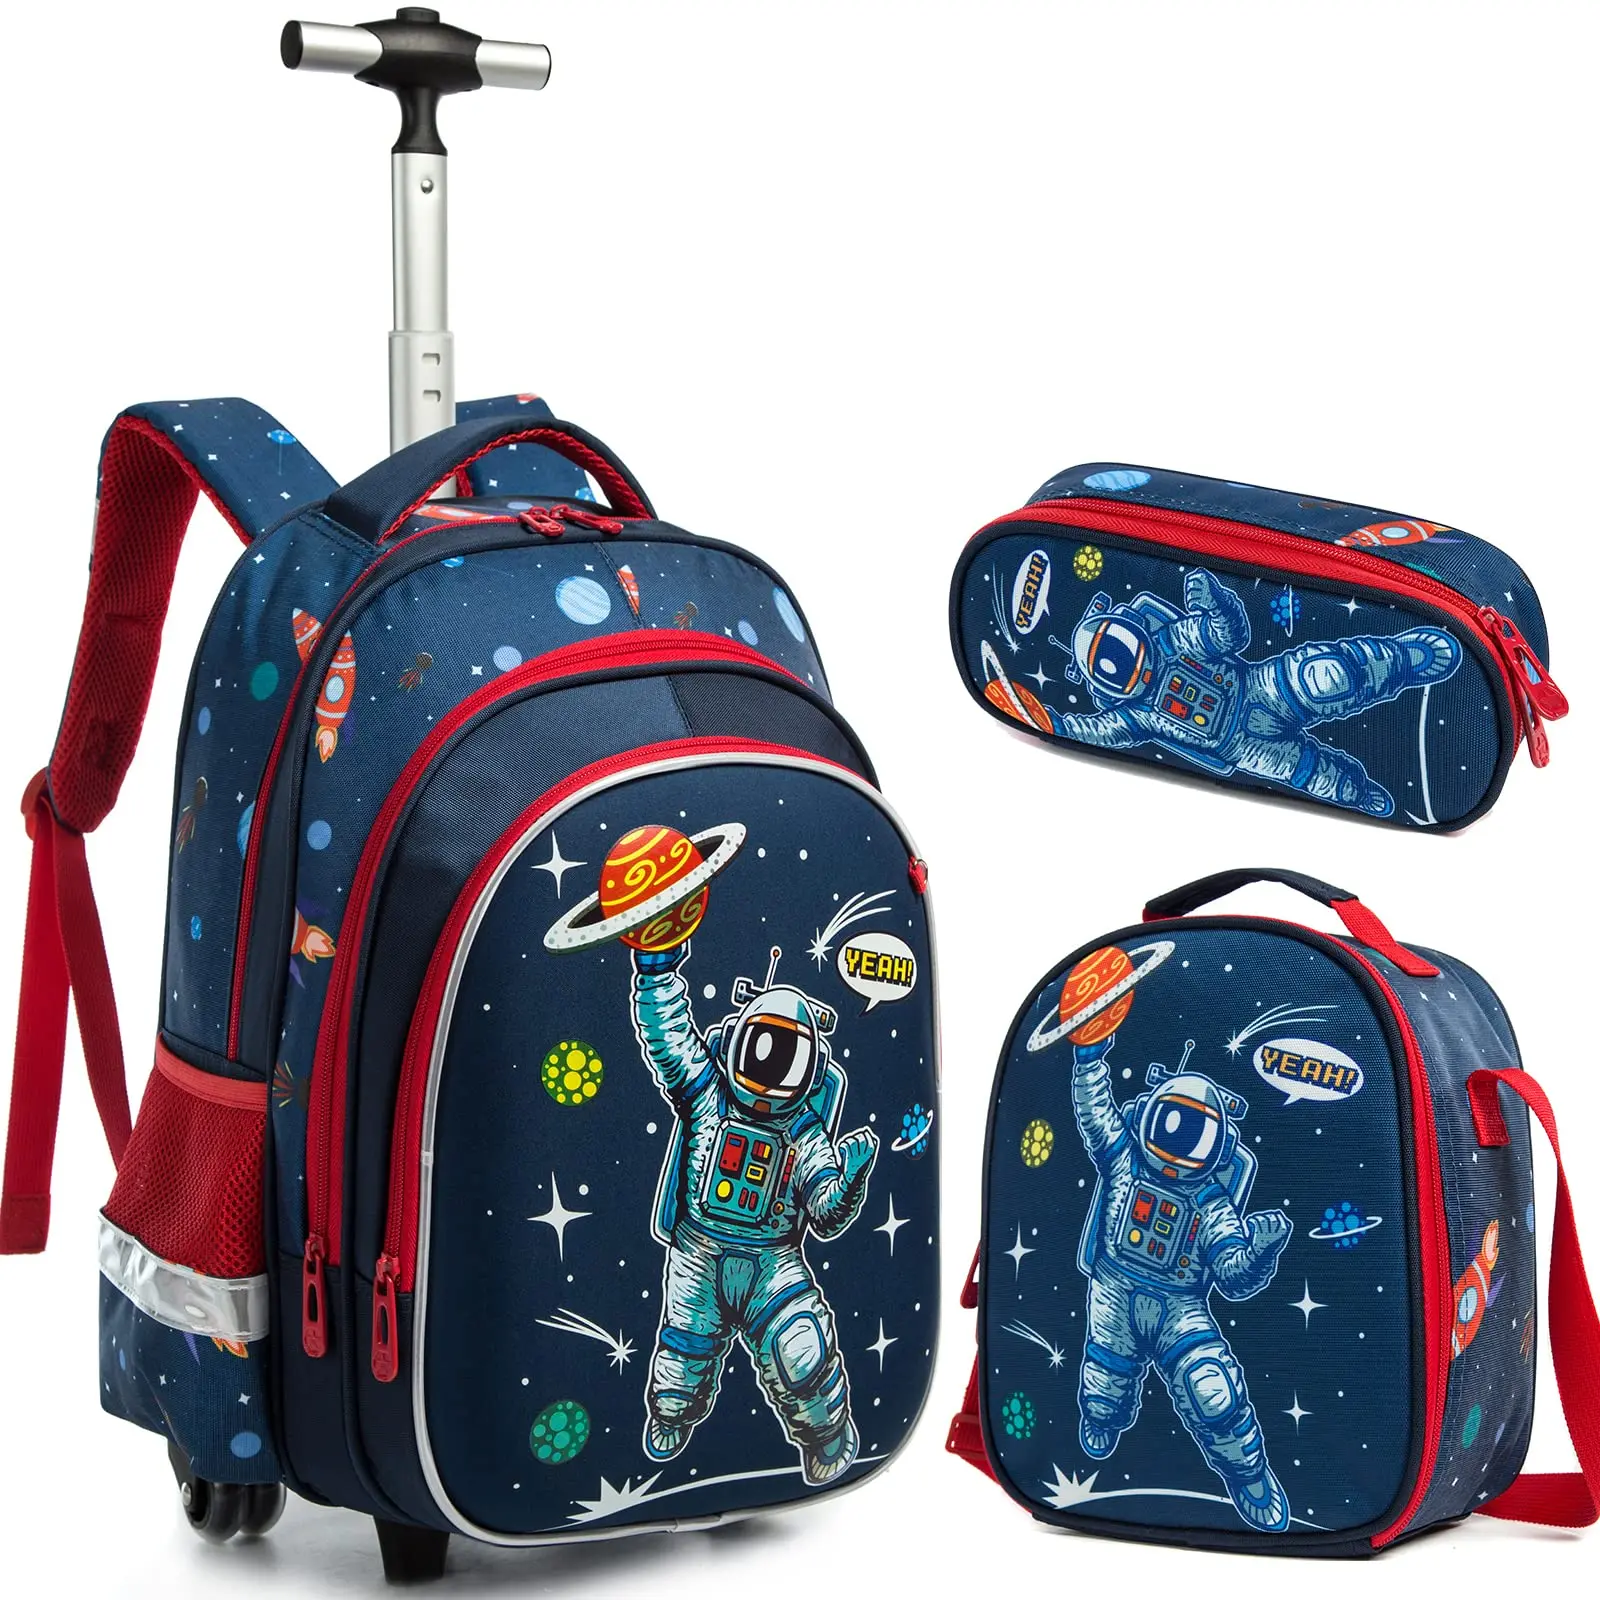 Wholesale Child luggage travel bags primary school trolley bag Boys and girls cartoon printed backpack